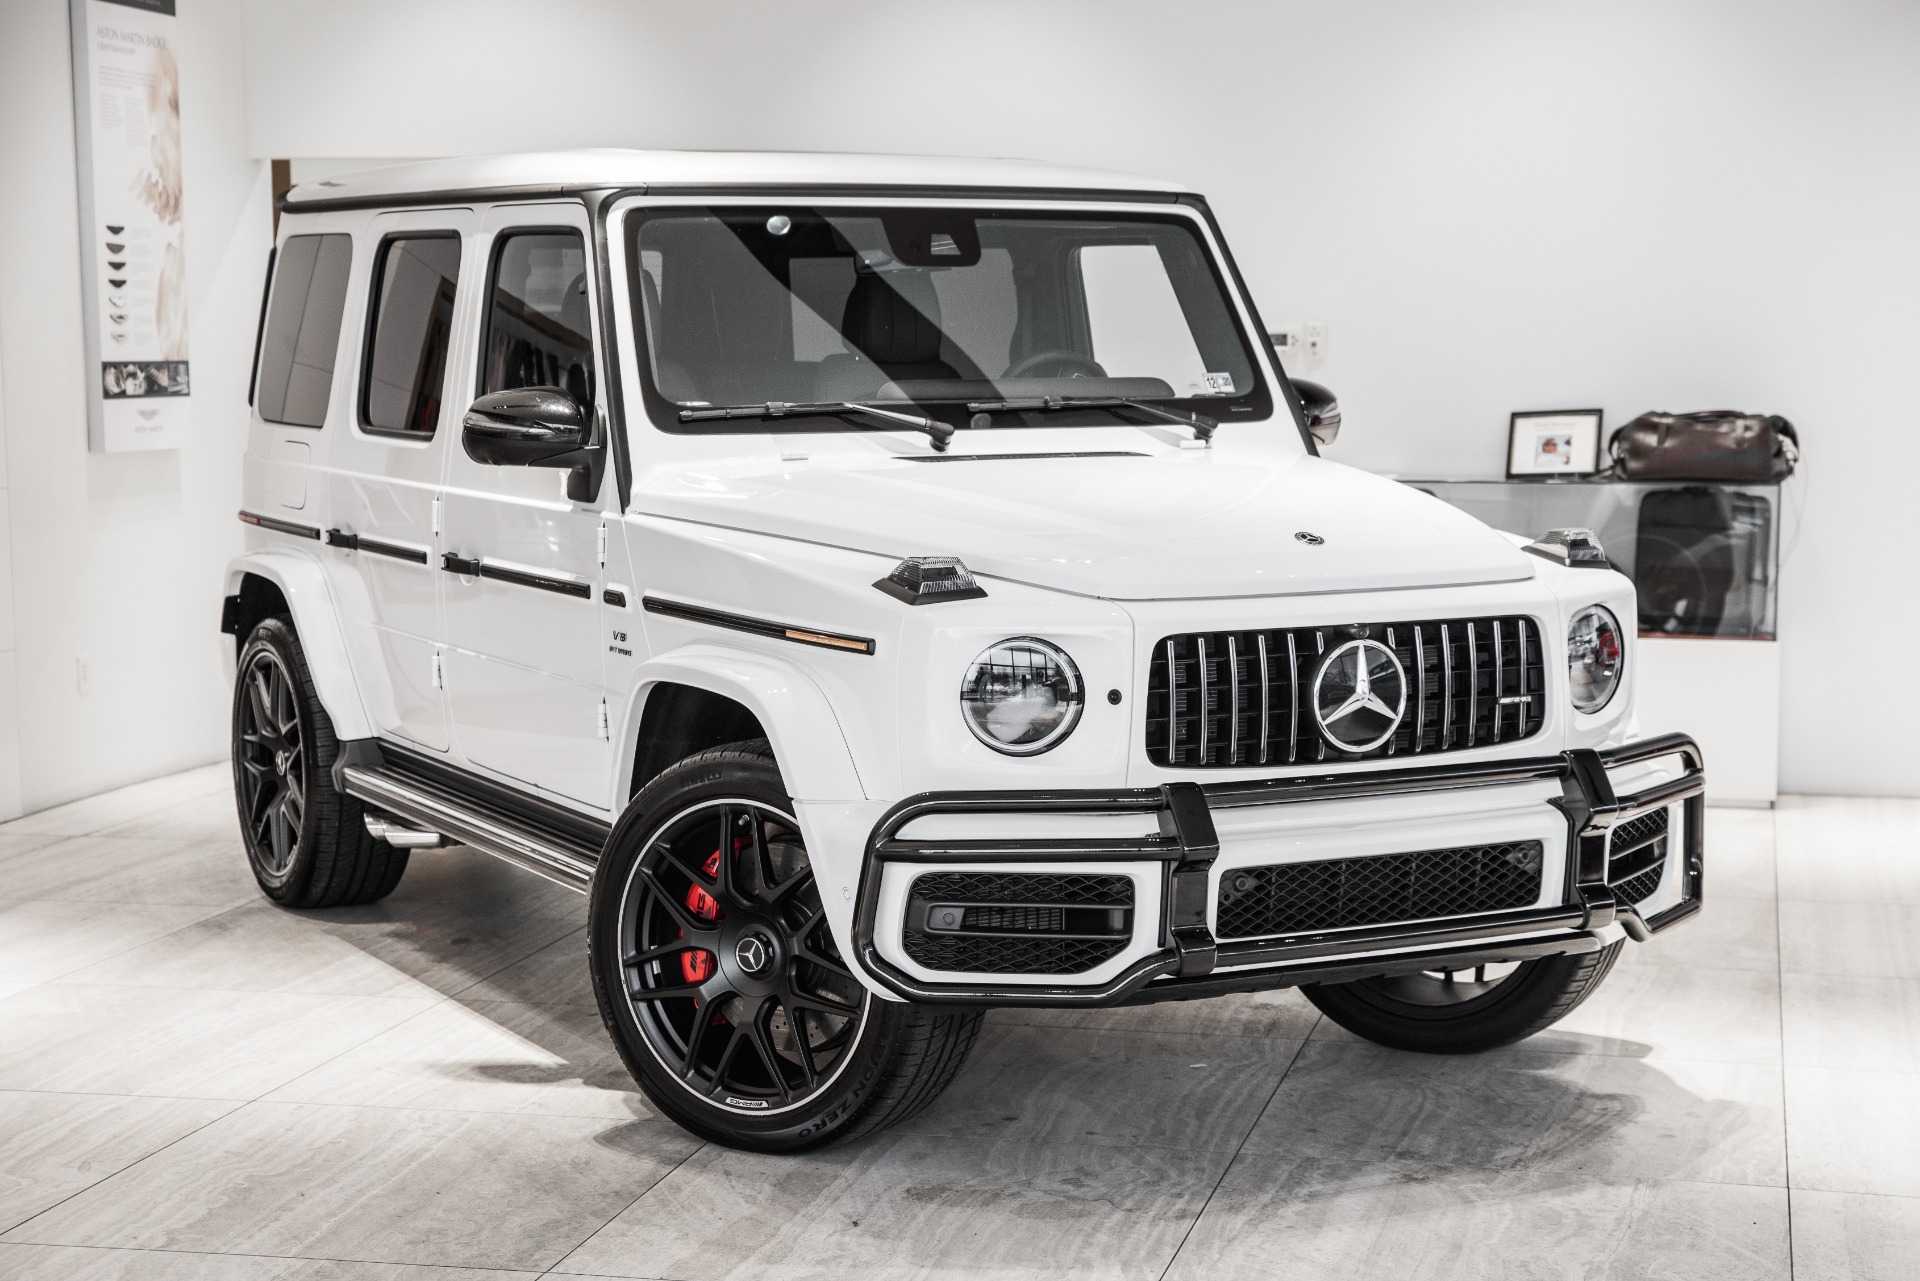 Introducing The 2021 Mercedes-Benz G-Class Mini. The G-Wagen is about to  get cuter.